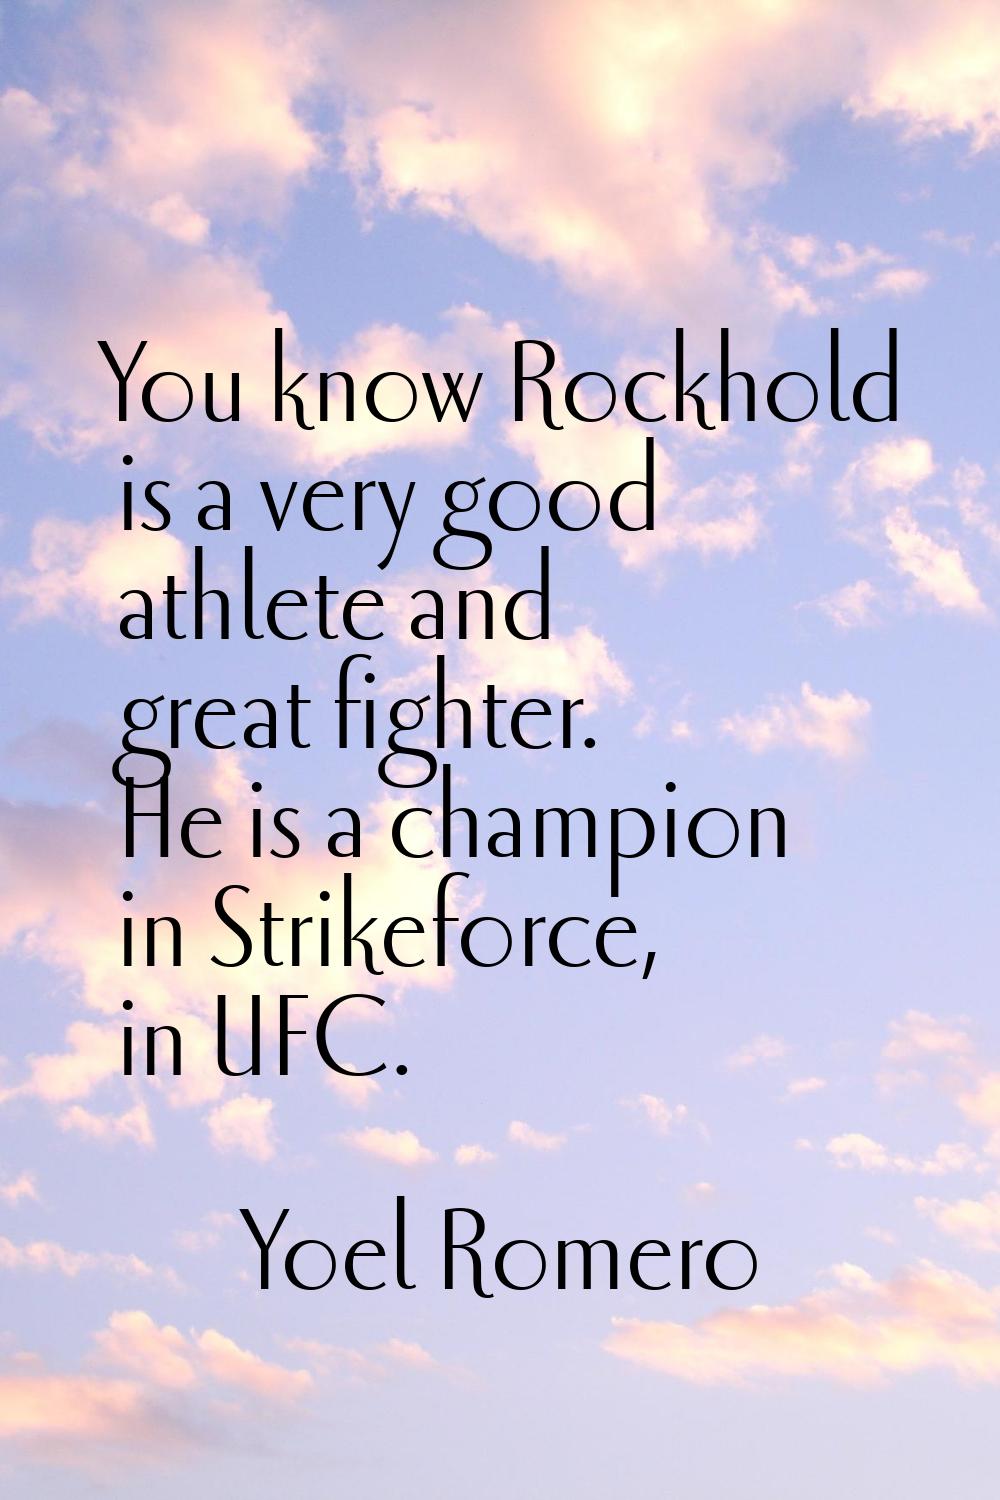 You know Rockhold is a very good athlete and great fighter. He is a champion in Strikeforce, in UFC